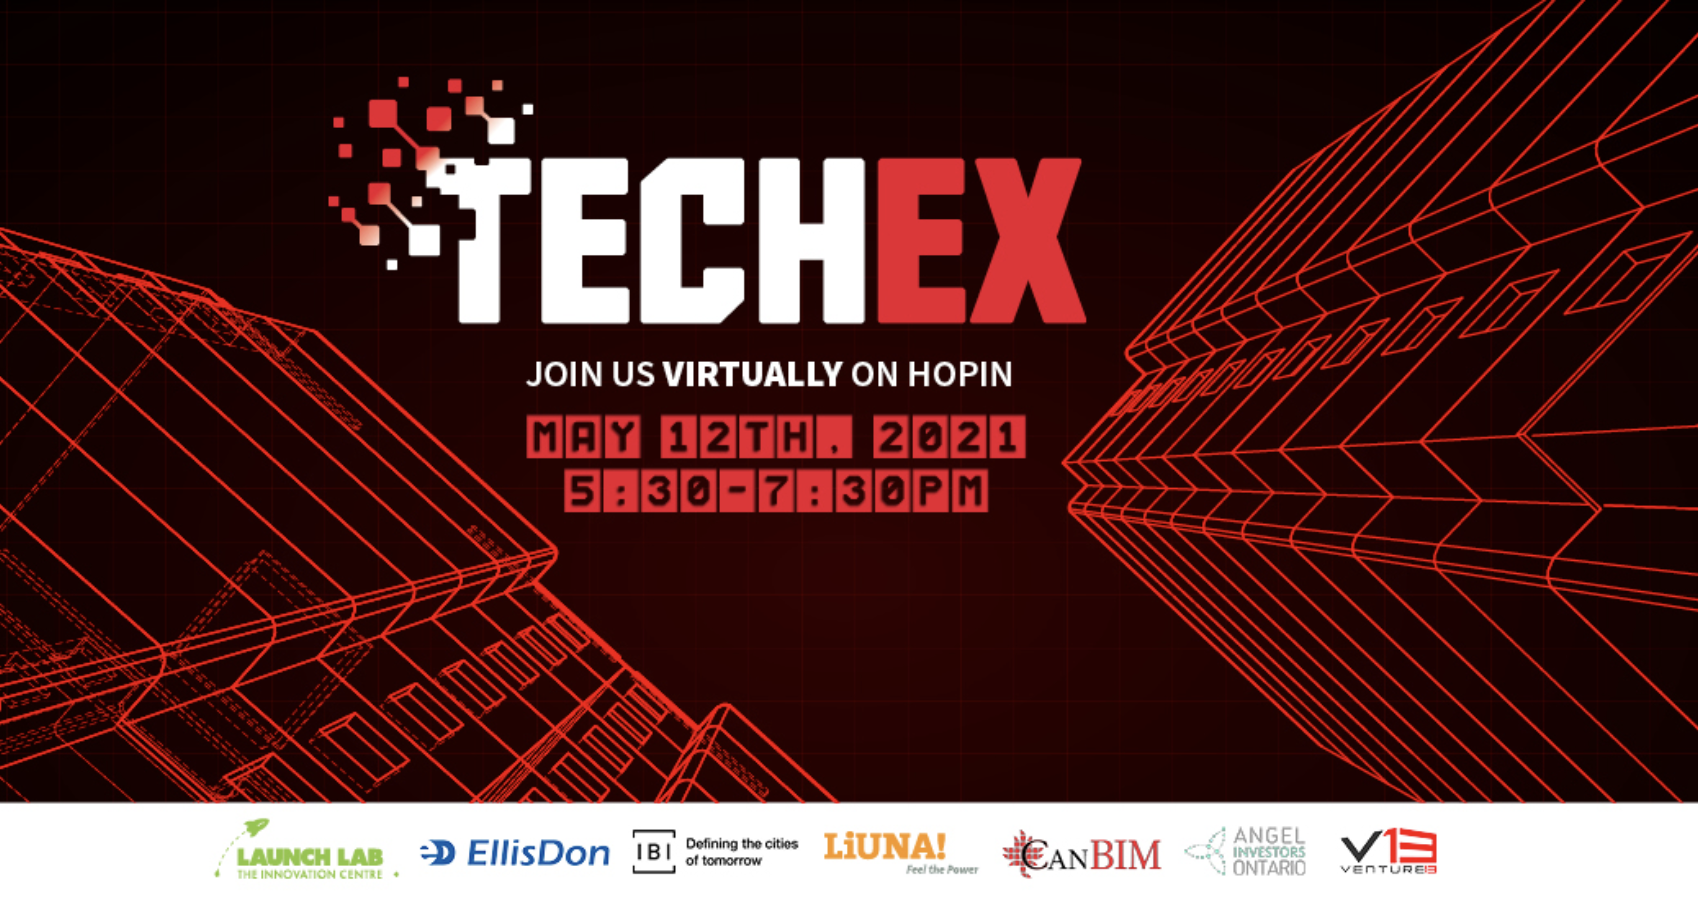 TECHEX Poster for Design & Construction Technology event.